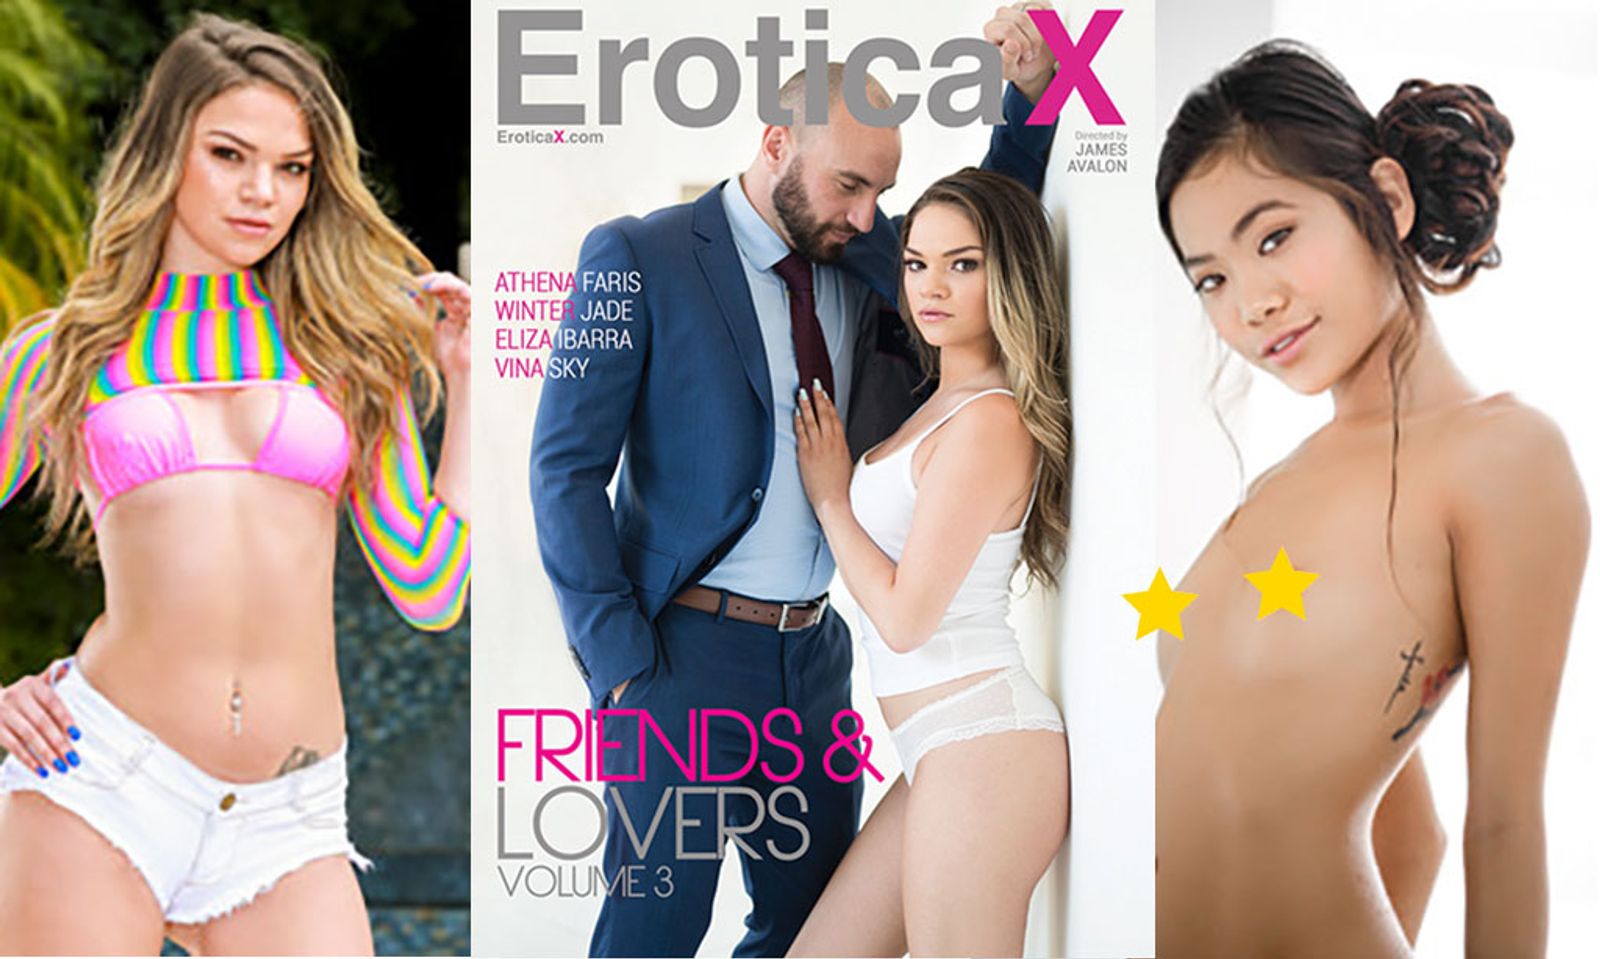 Athena Faris Plays It Coy On The Cover Of ‘Friends & Lovers 3’